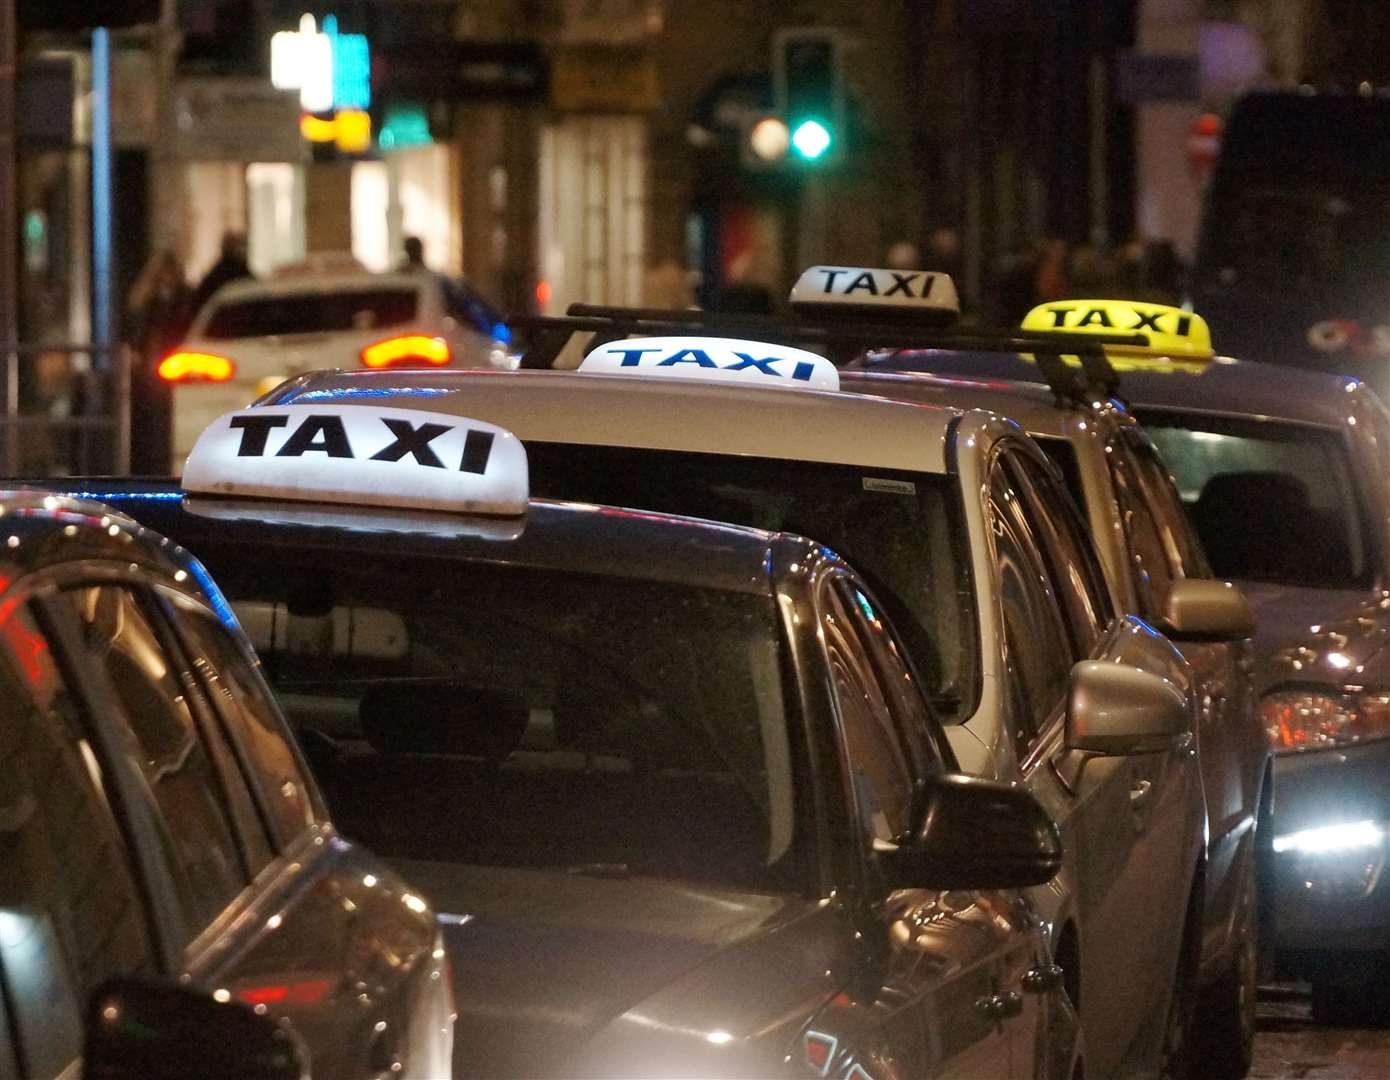 Taxi fares are set to rise by a fifth under current proposals.